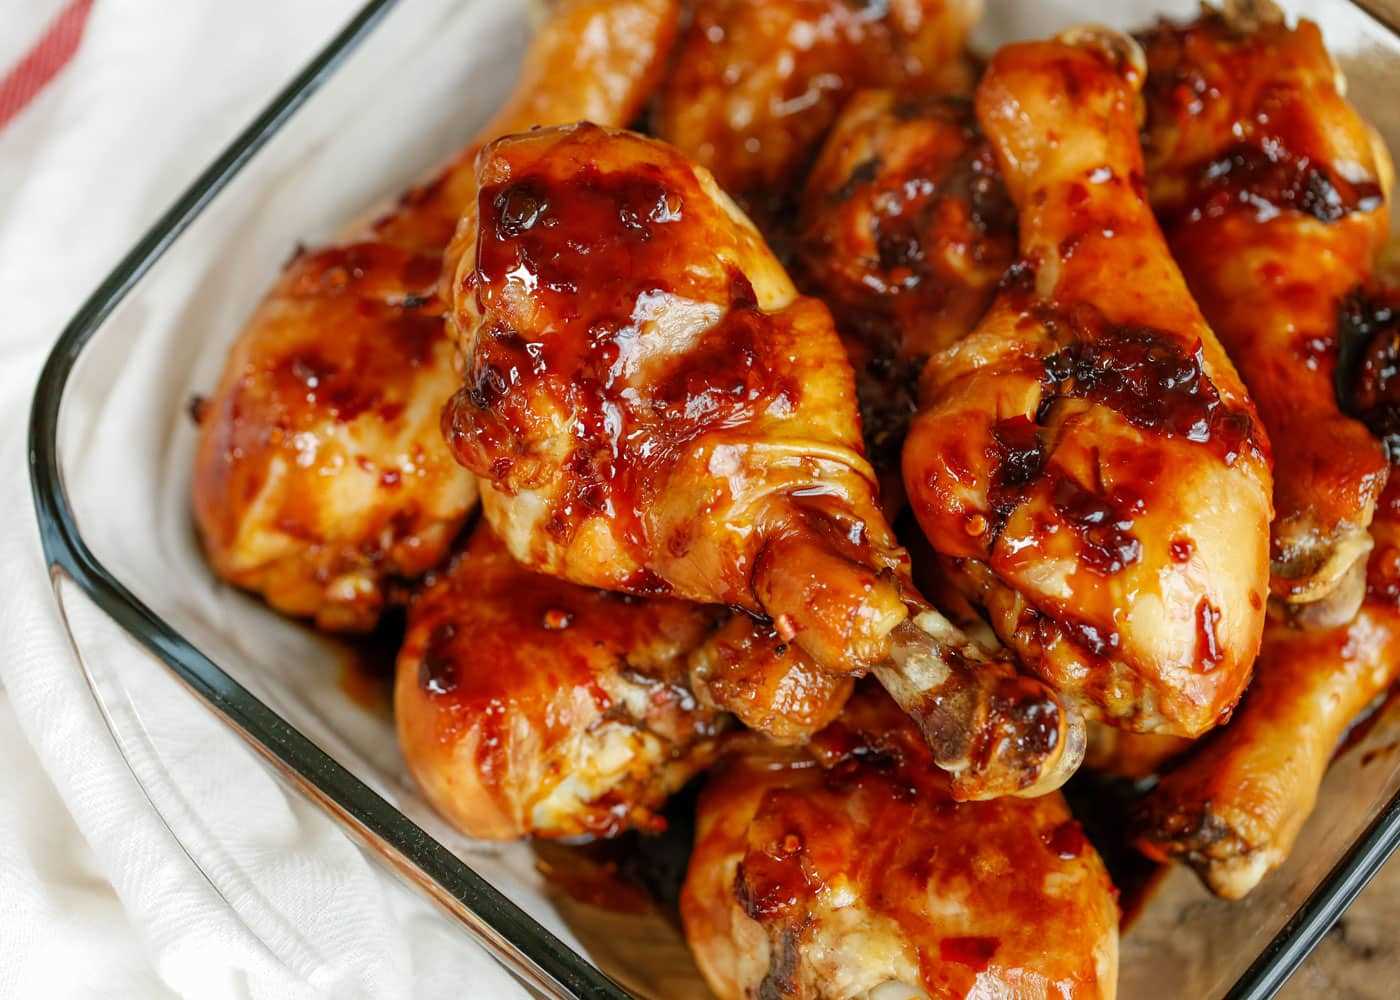 Sticky Asian Chicken is a sweet, salty, spicy blend of flavors that no one can resist! Get the recipe at barefeetinthekitchen.com